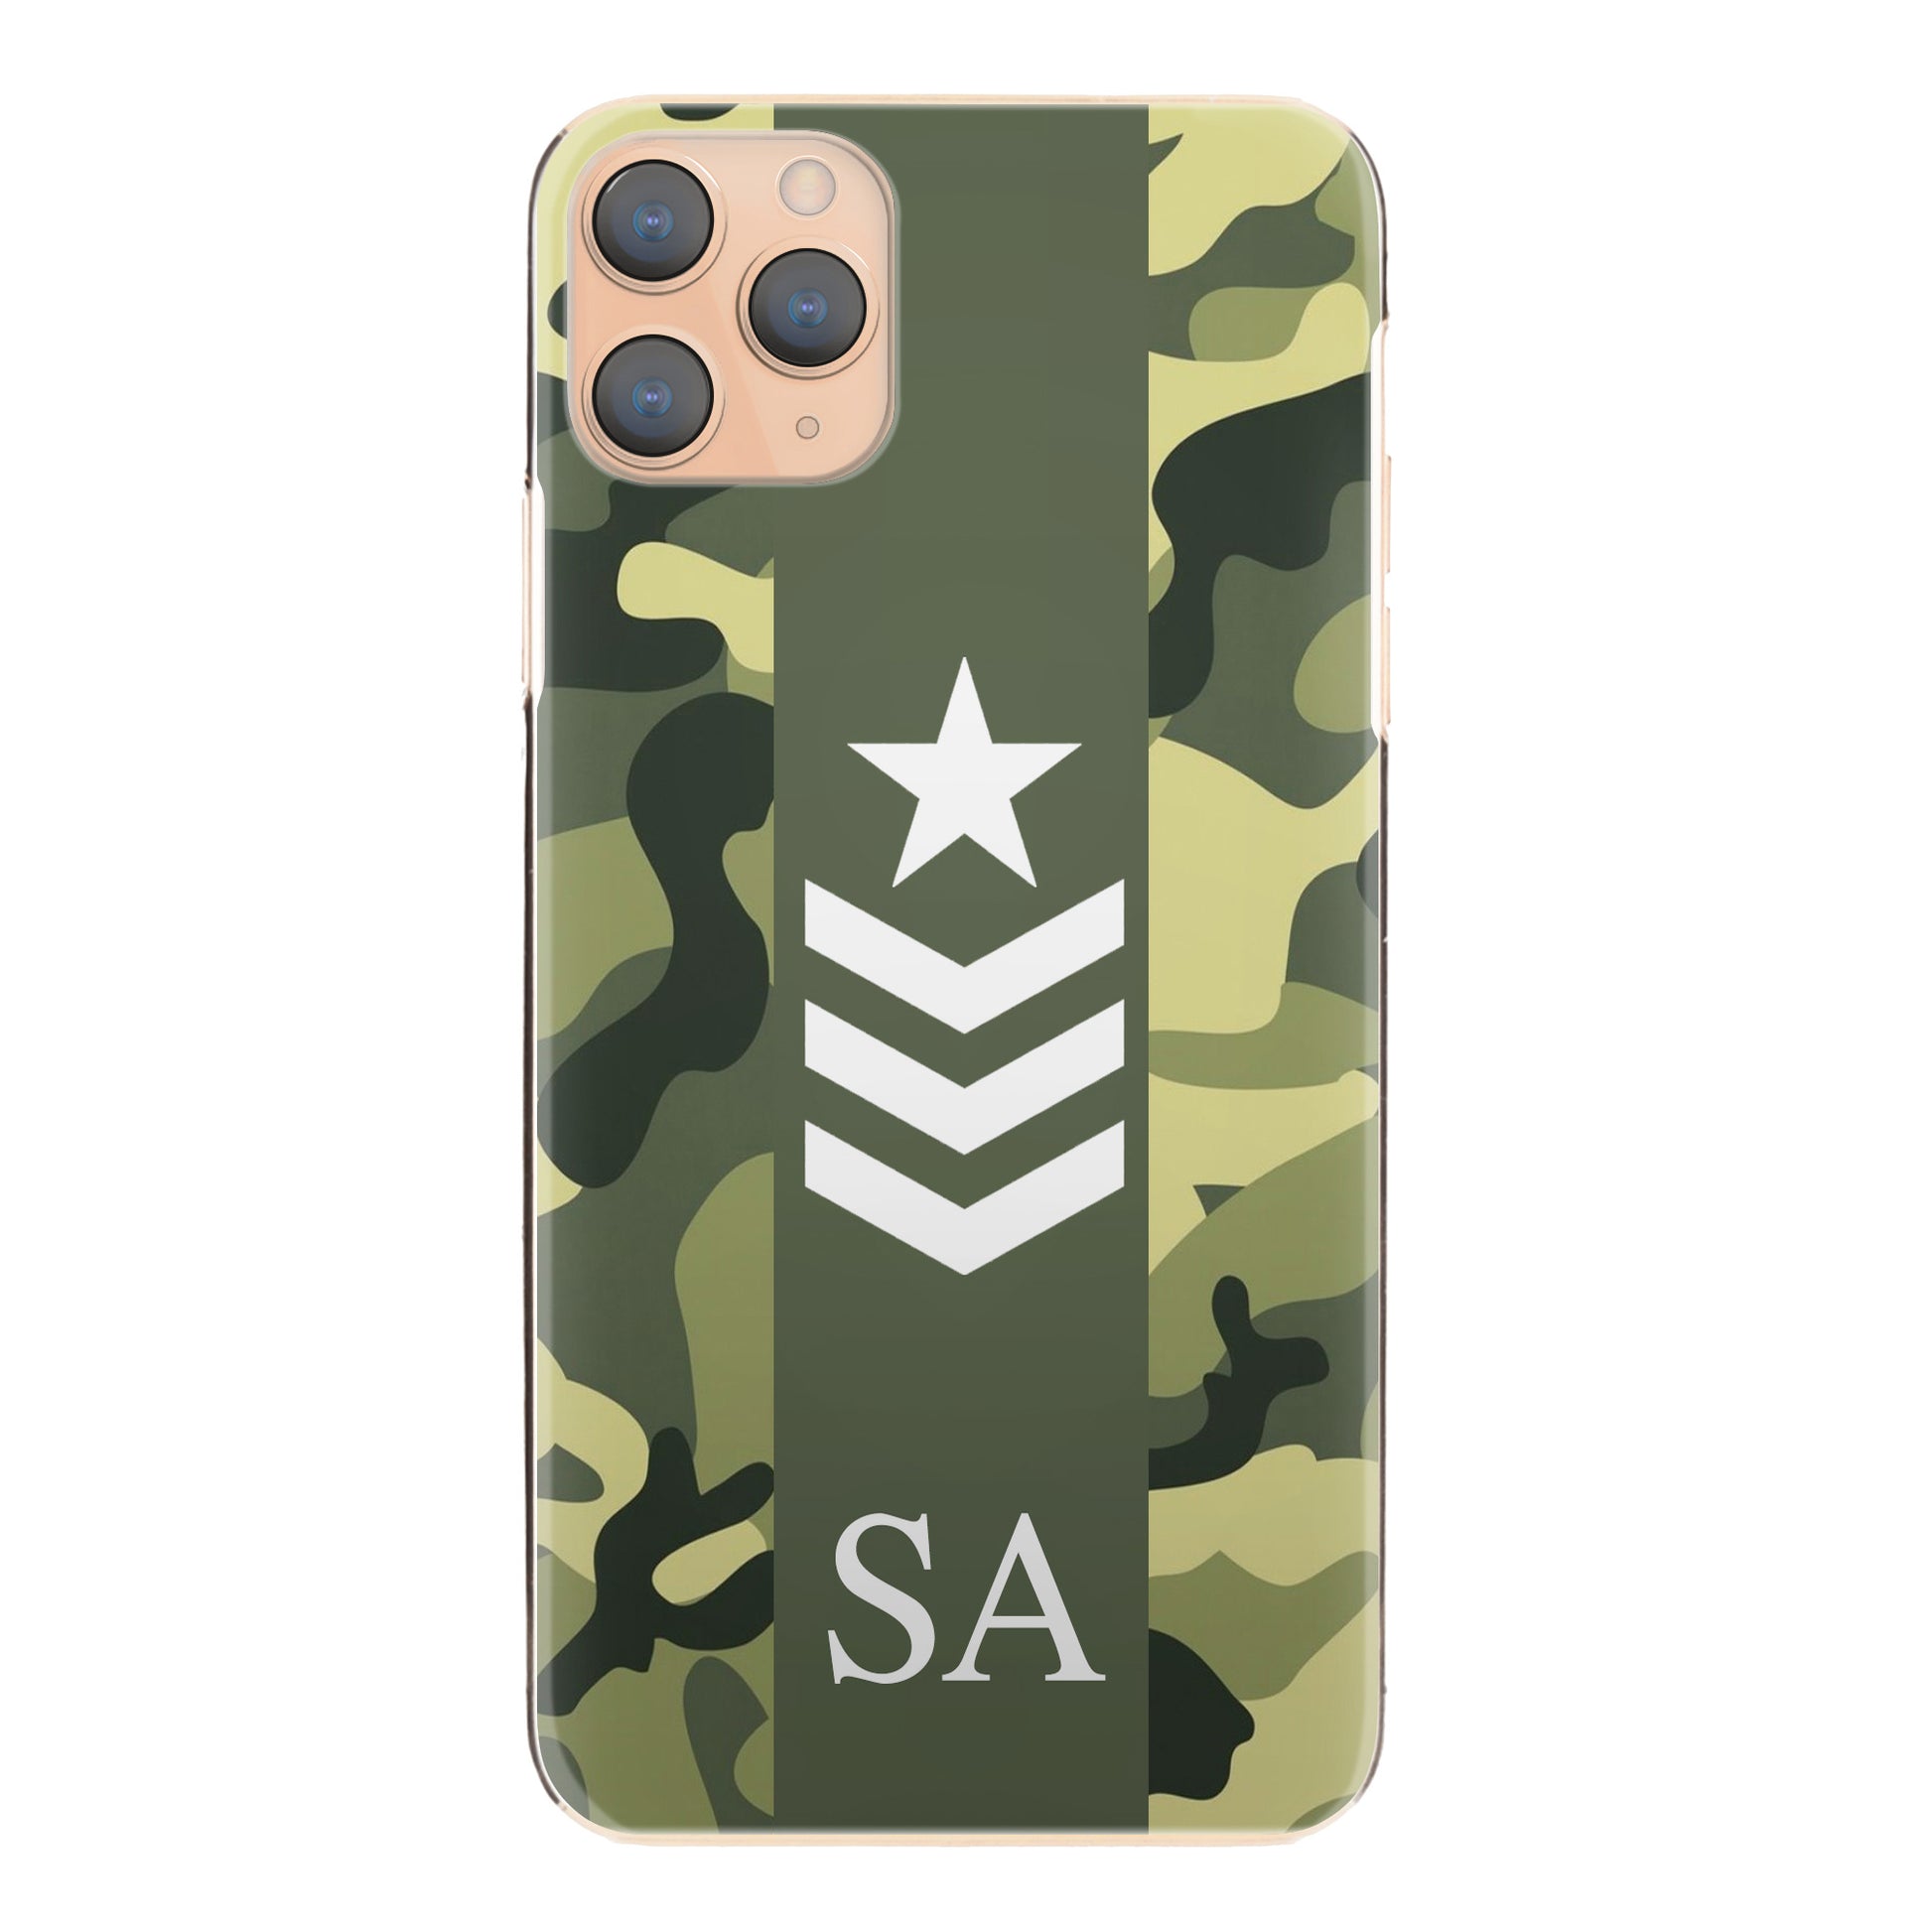 Personalised Oppo Phone Hard Case with Initials and Army Rank on Classic Green Camo